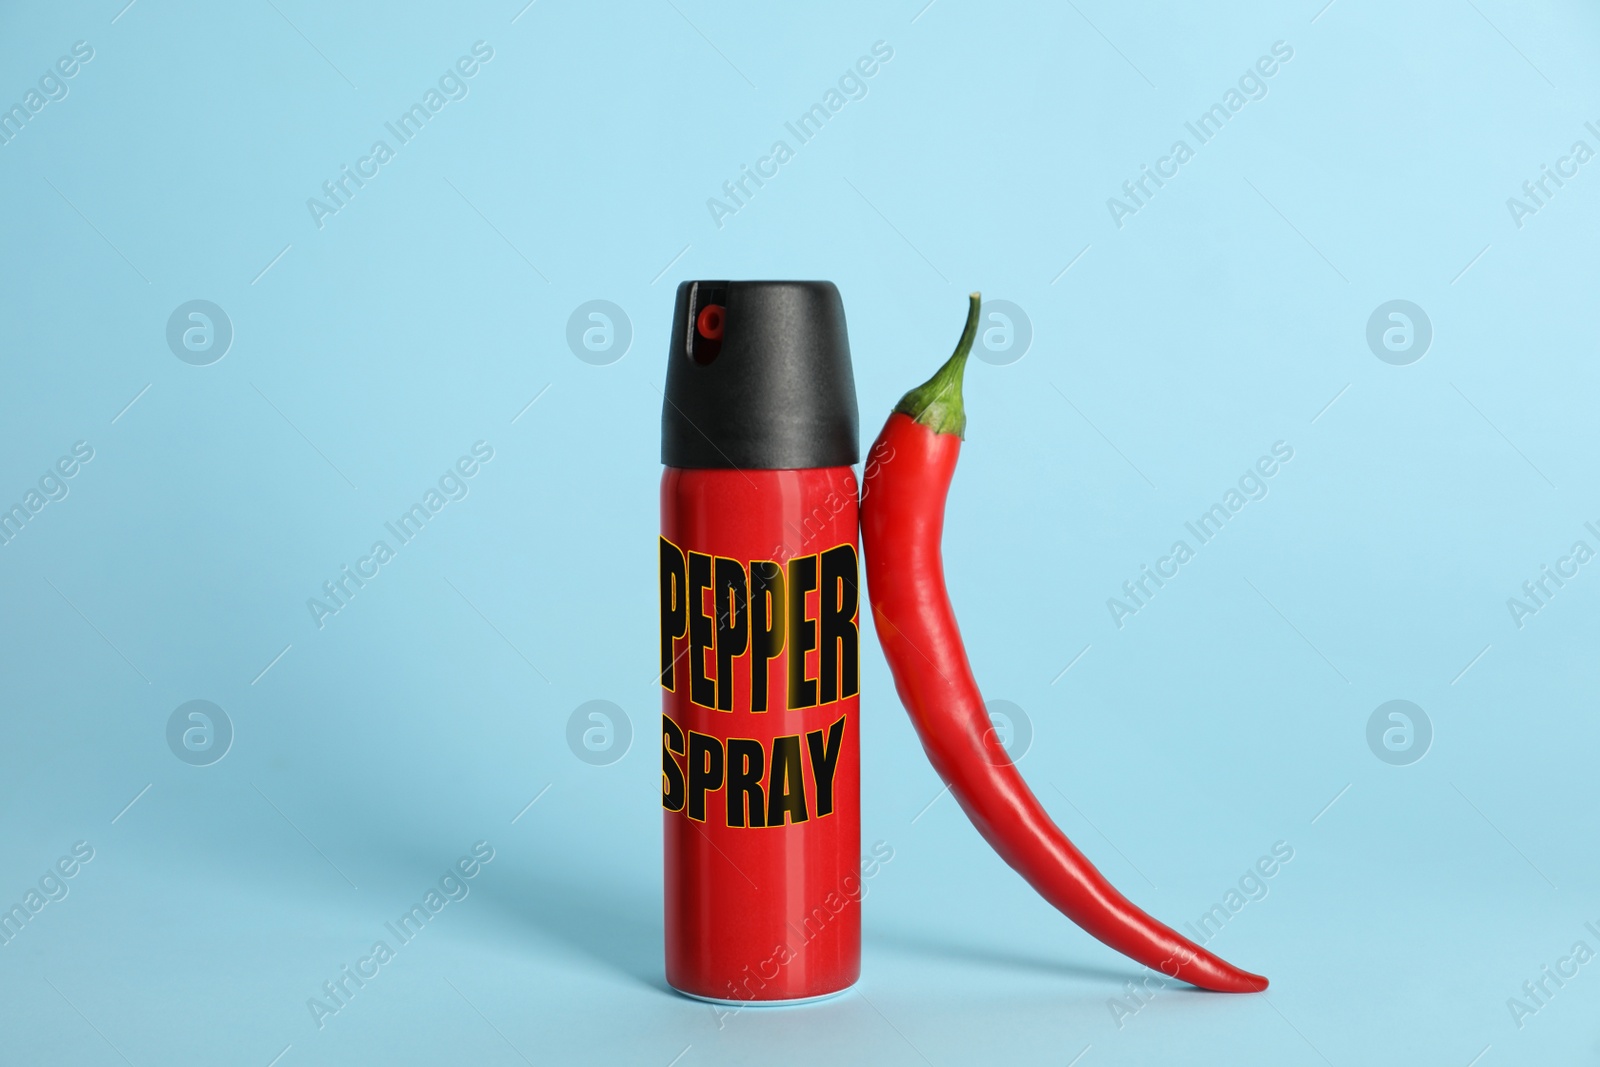 Image of Bottle of gas spray and fresh chili pepper on light blue background